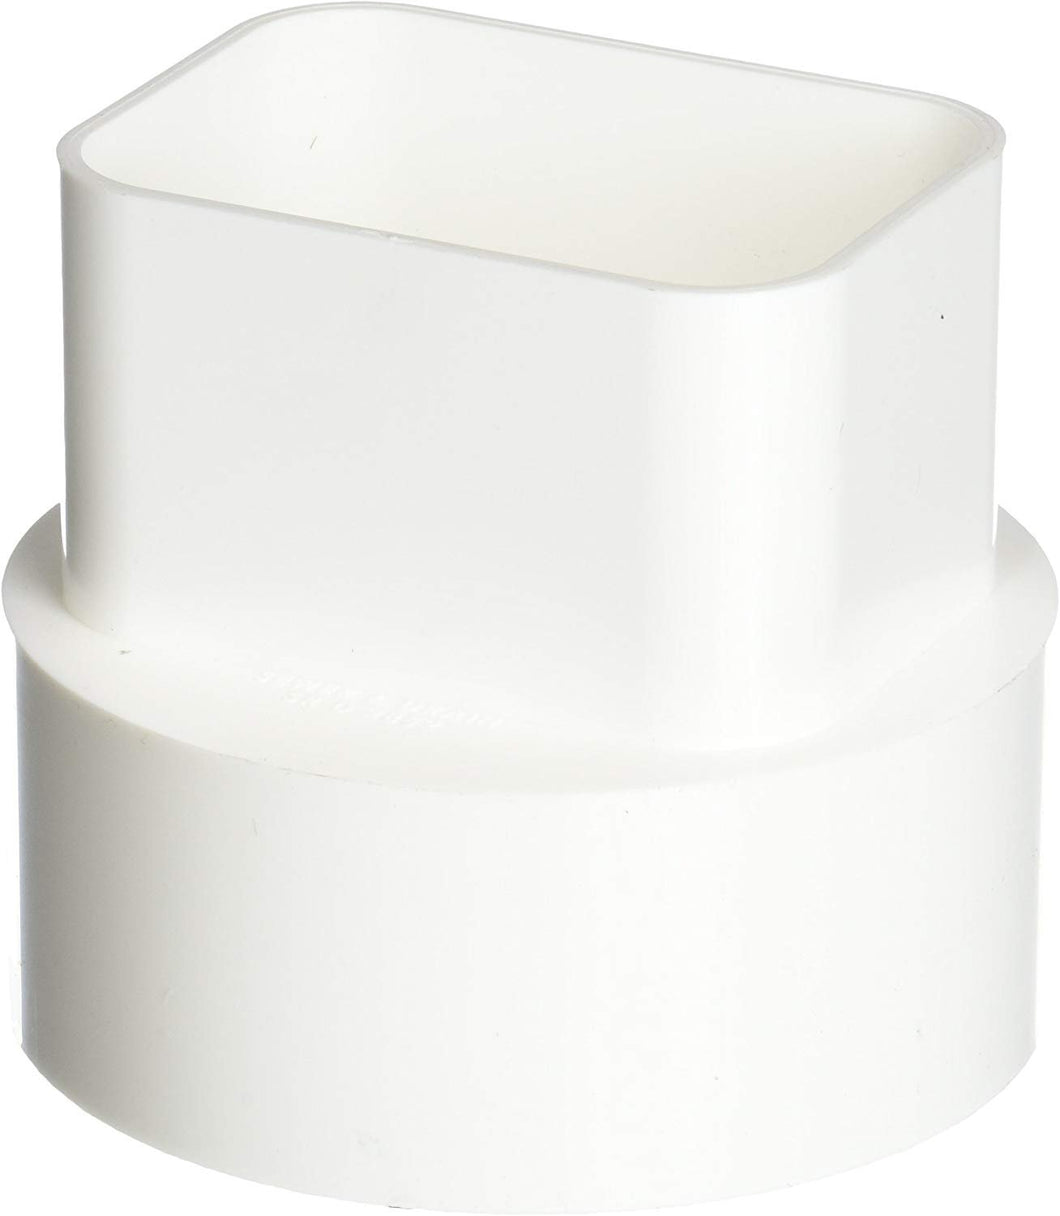 Genova Products S45234 Styrene Downspout Adapter, 2